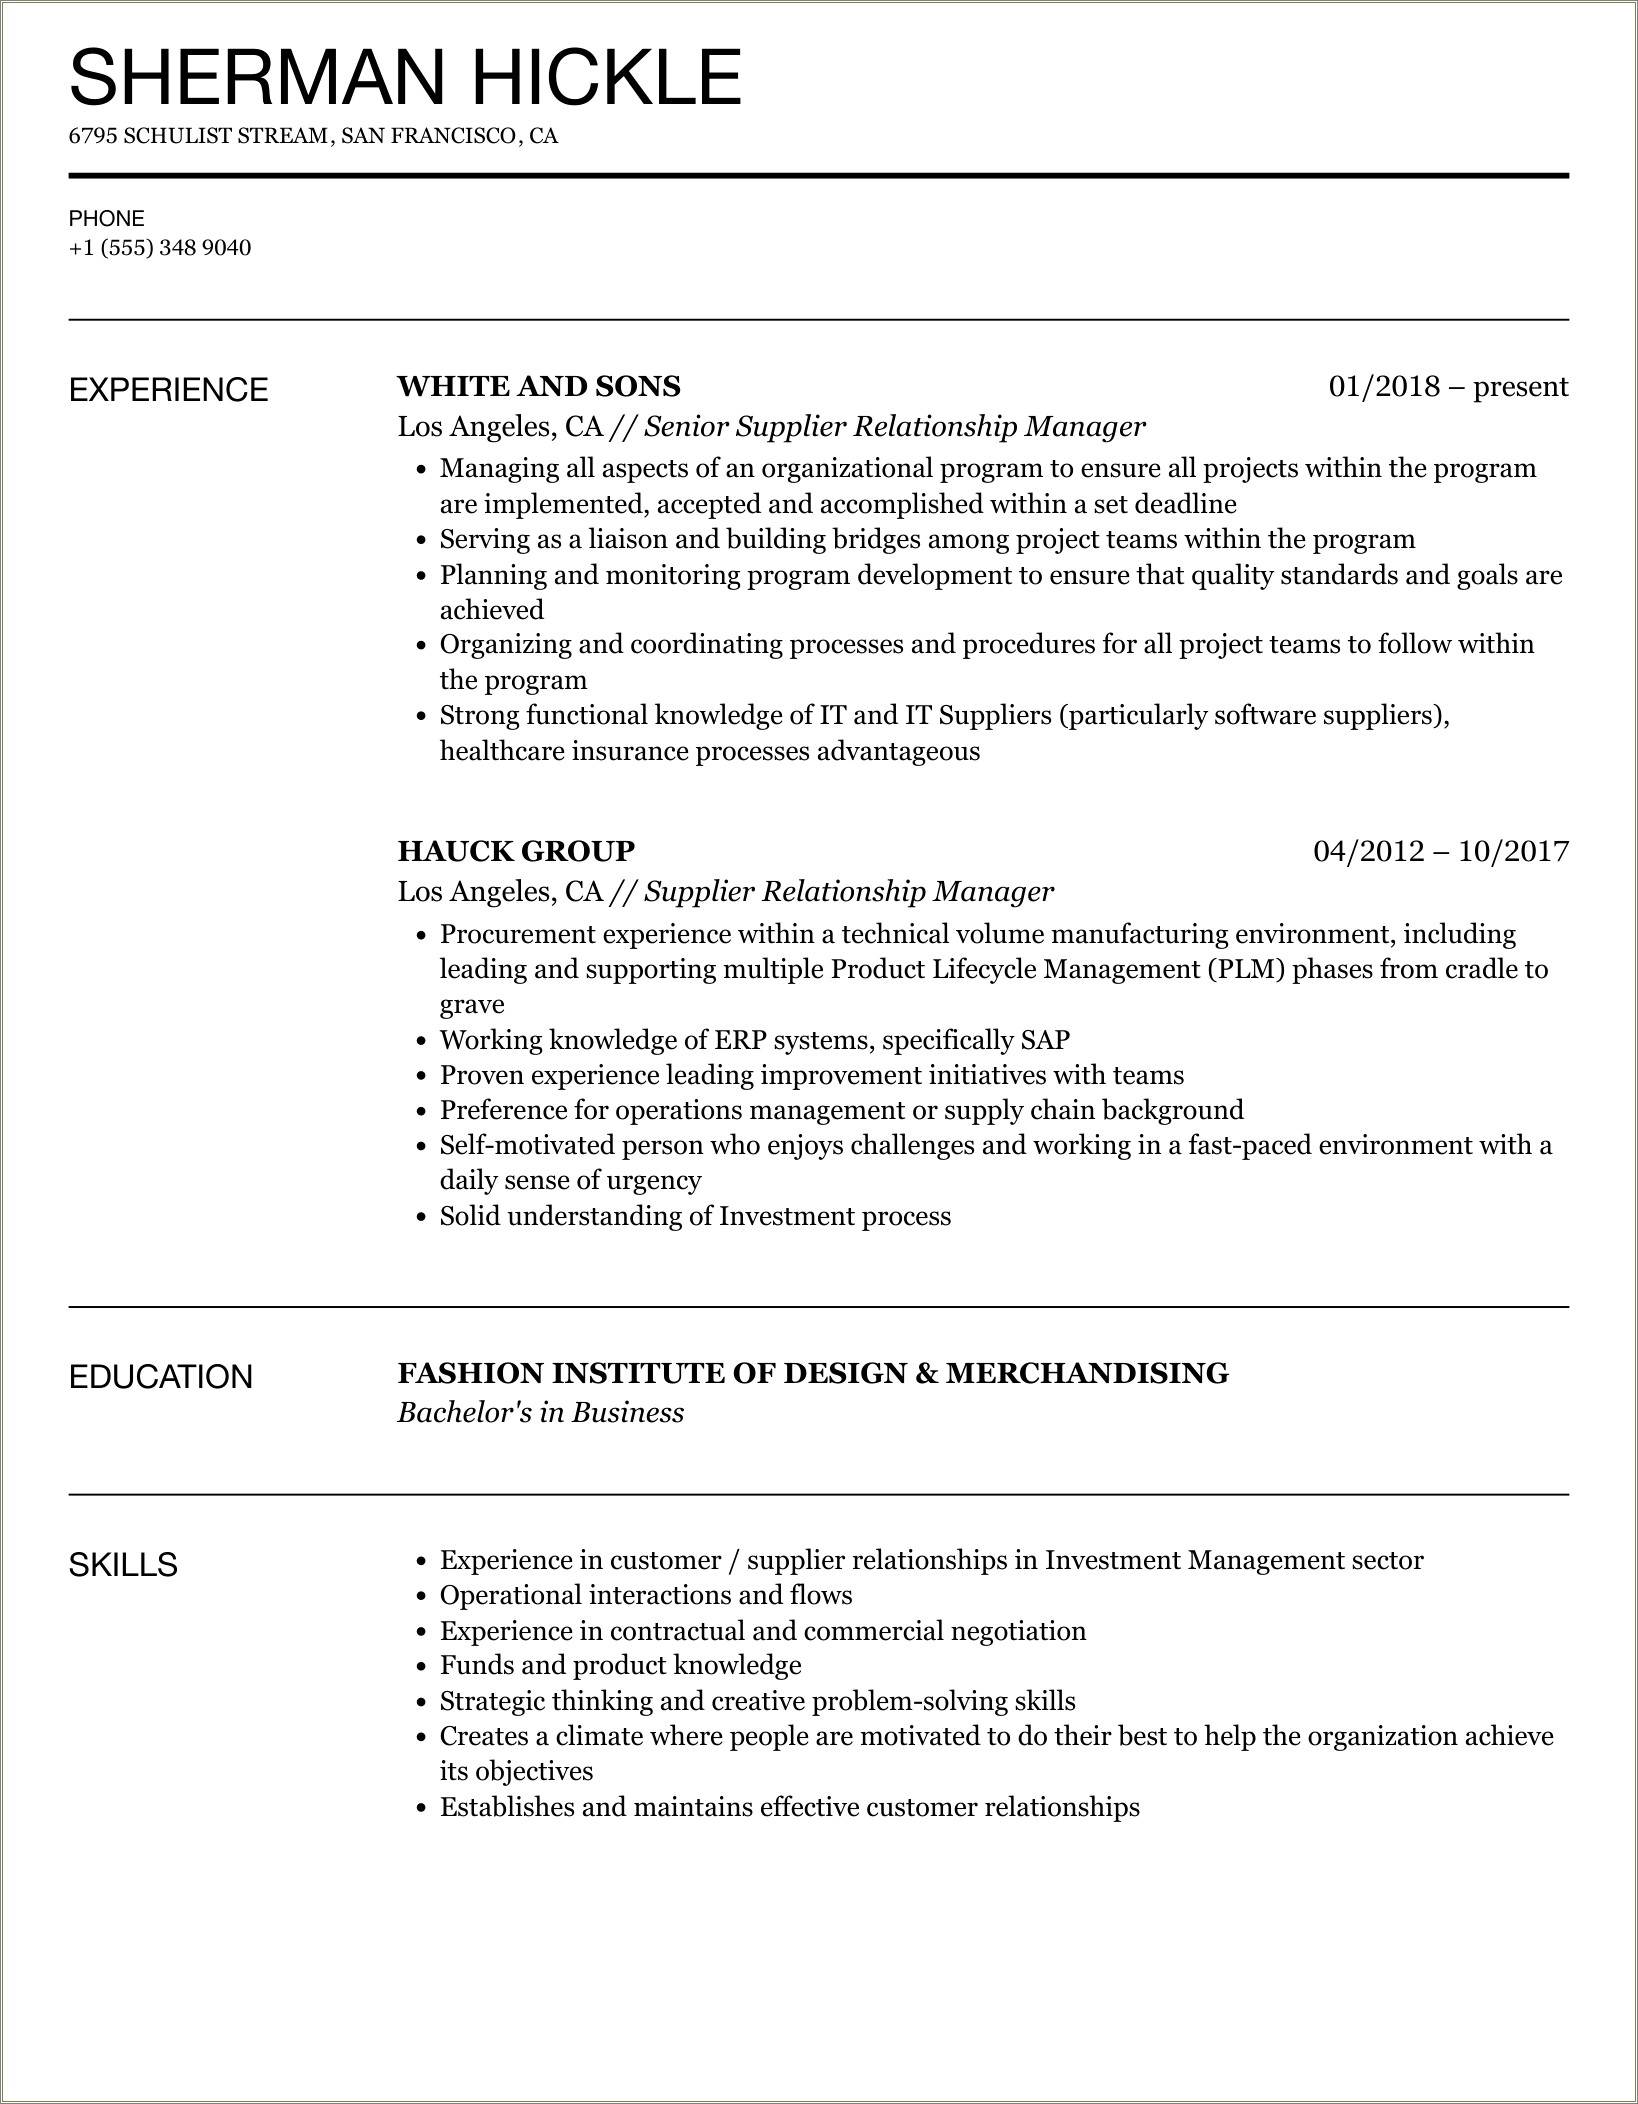 Objective Statement For Resume For Relationhip Manager